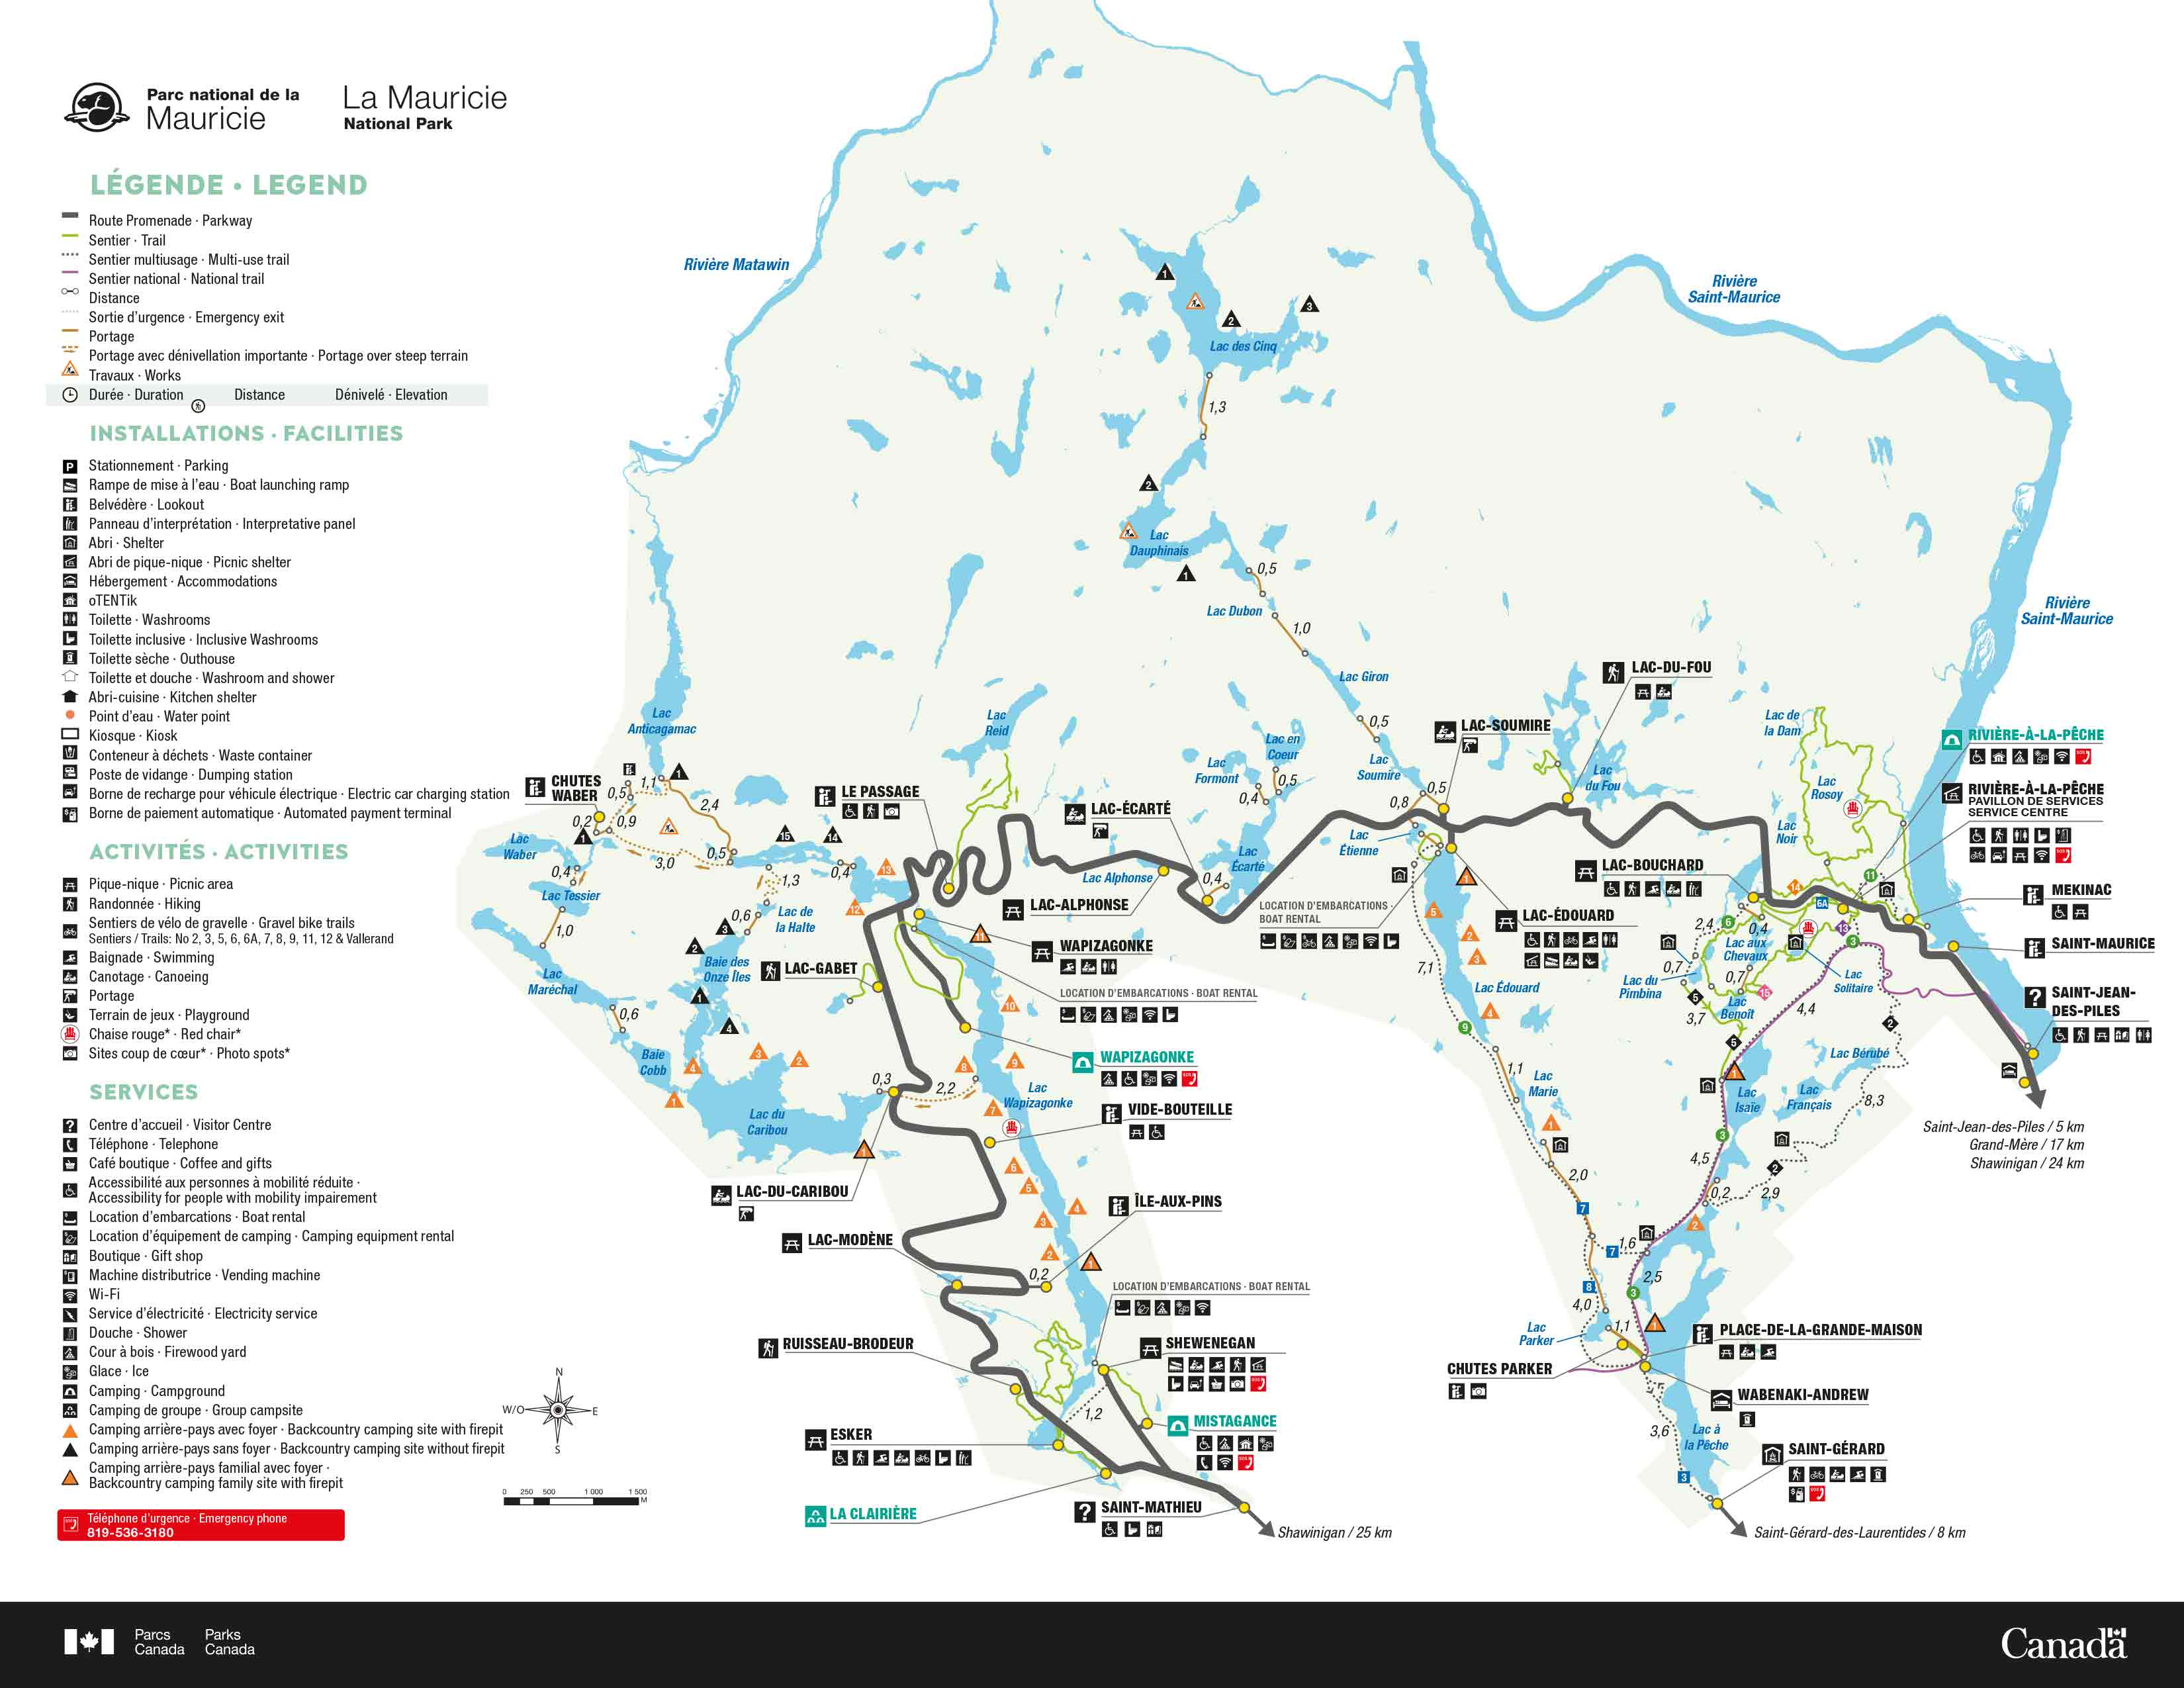 Complete map of La Mauricie National Park